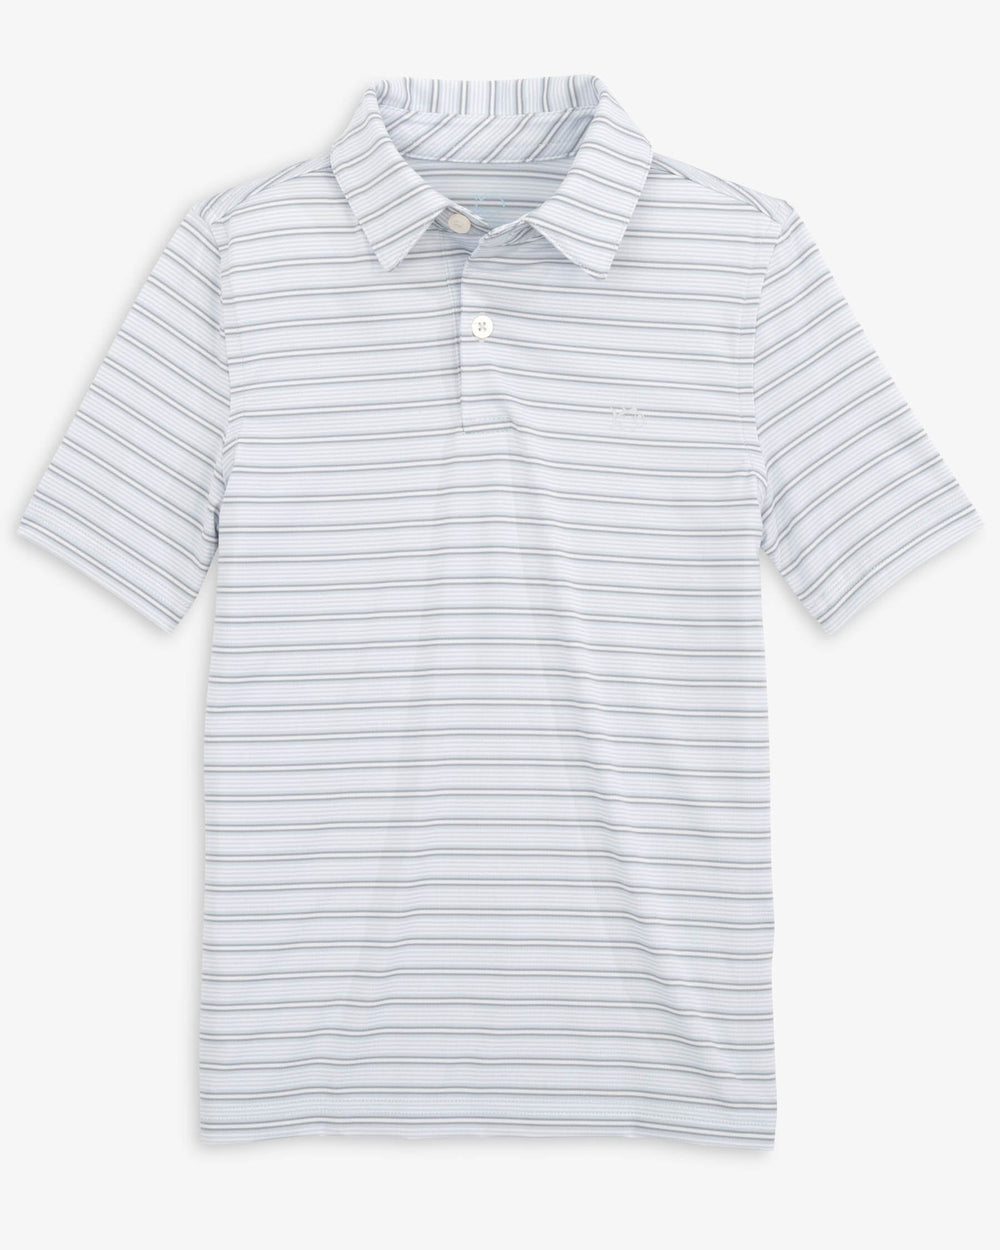 The front view of the Southern Tide Boys Driver Crawford Stripe Performance Polo Shirt by Southern Tide - Slate Grey